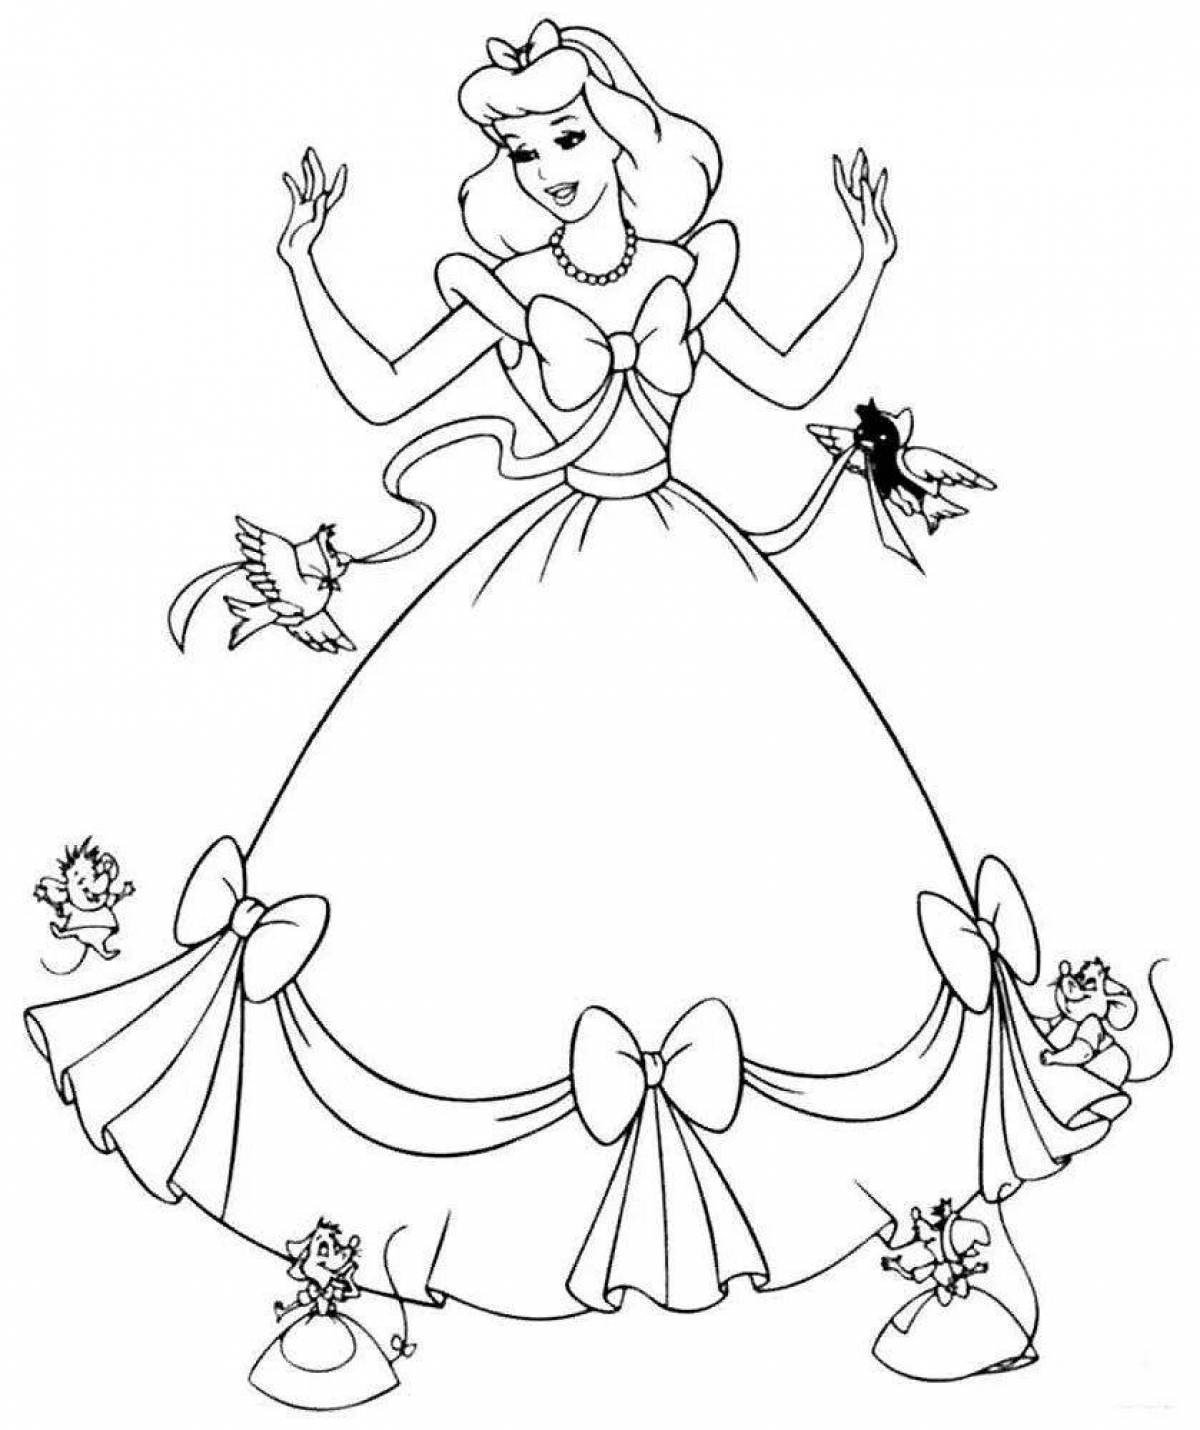 Exotic Cinderella coloring book for children 4-5 years old